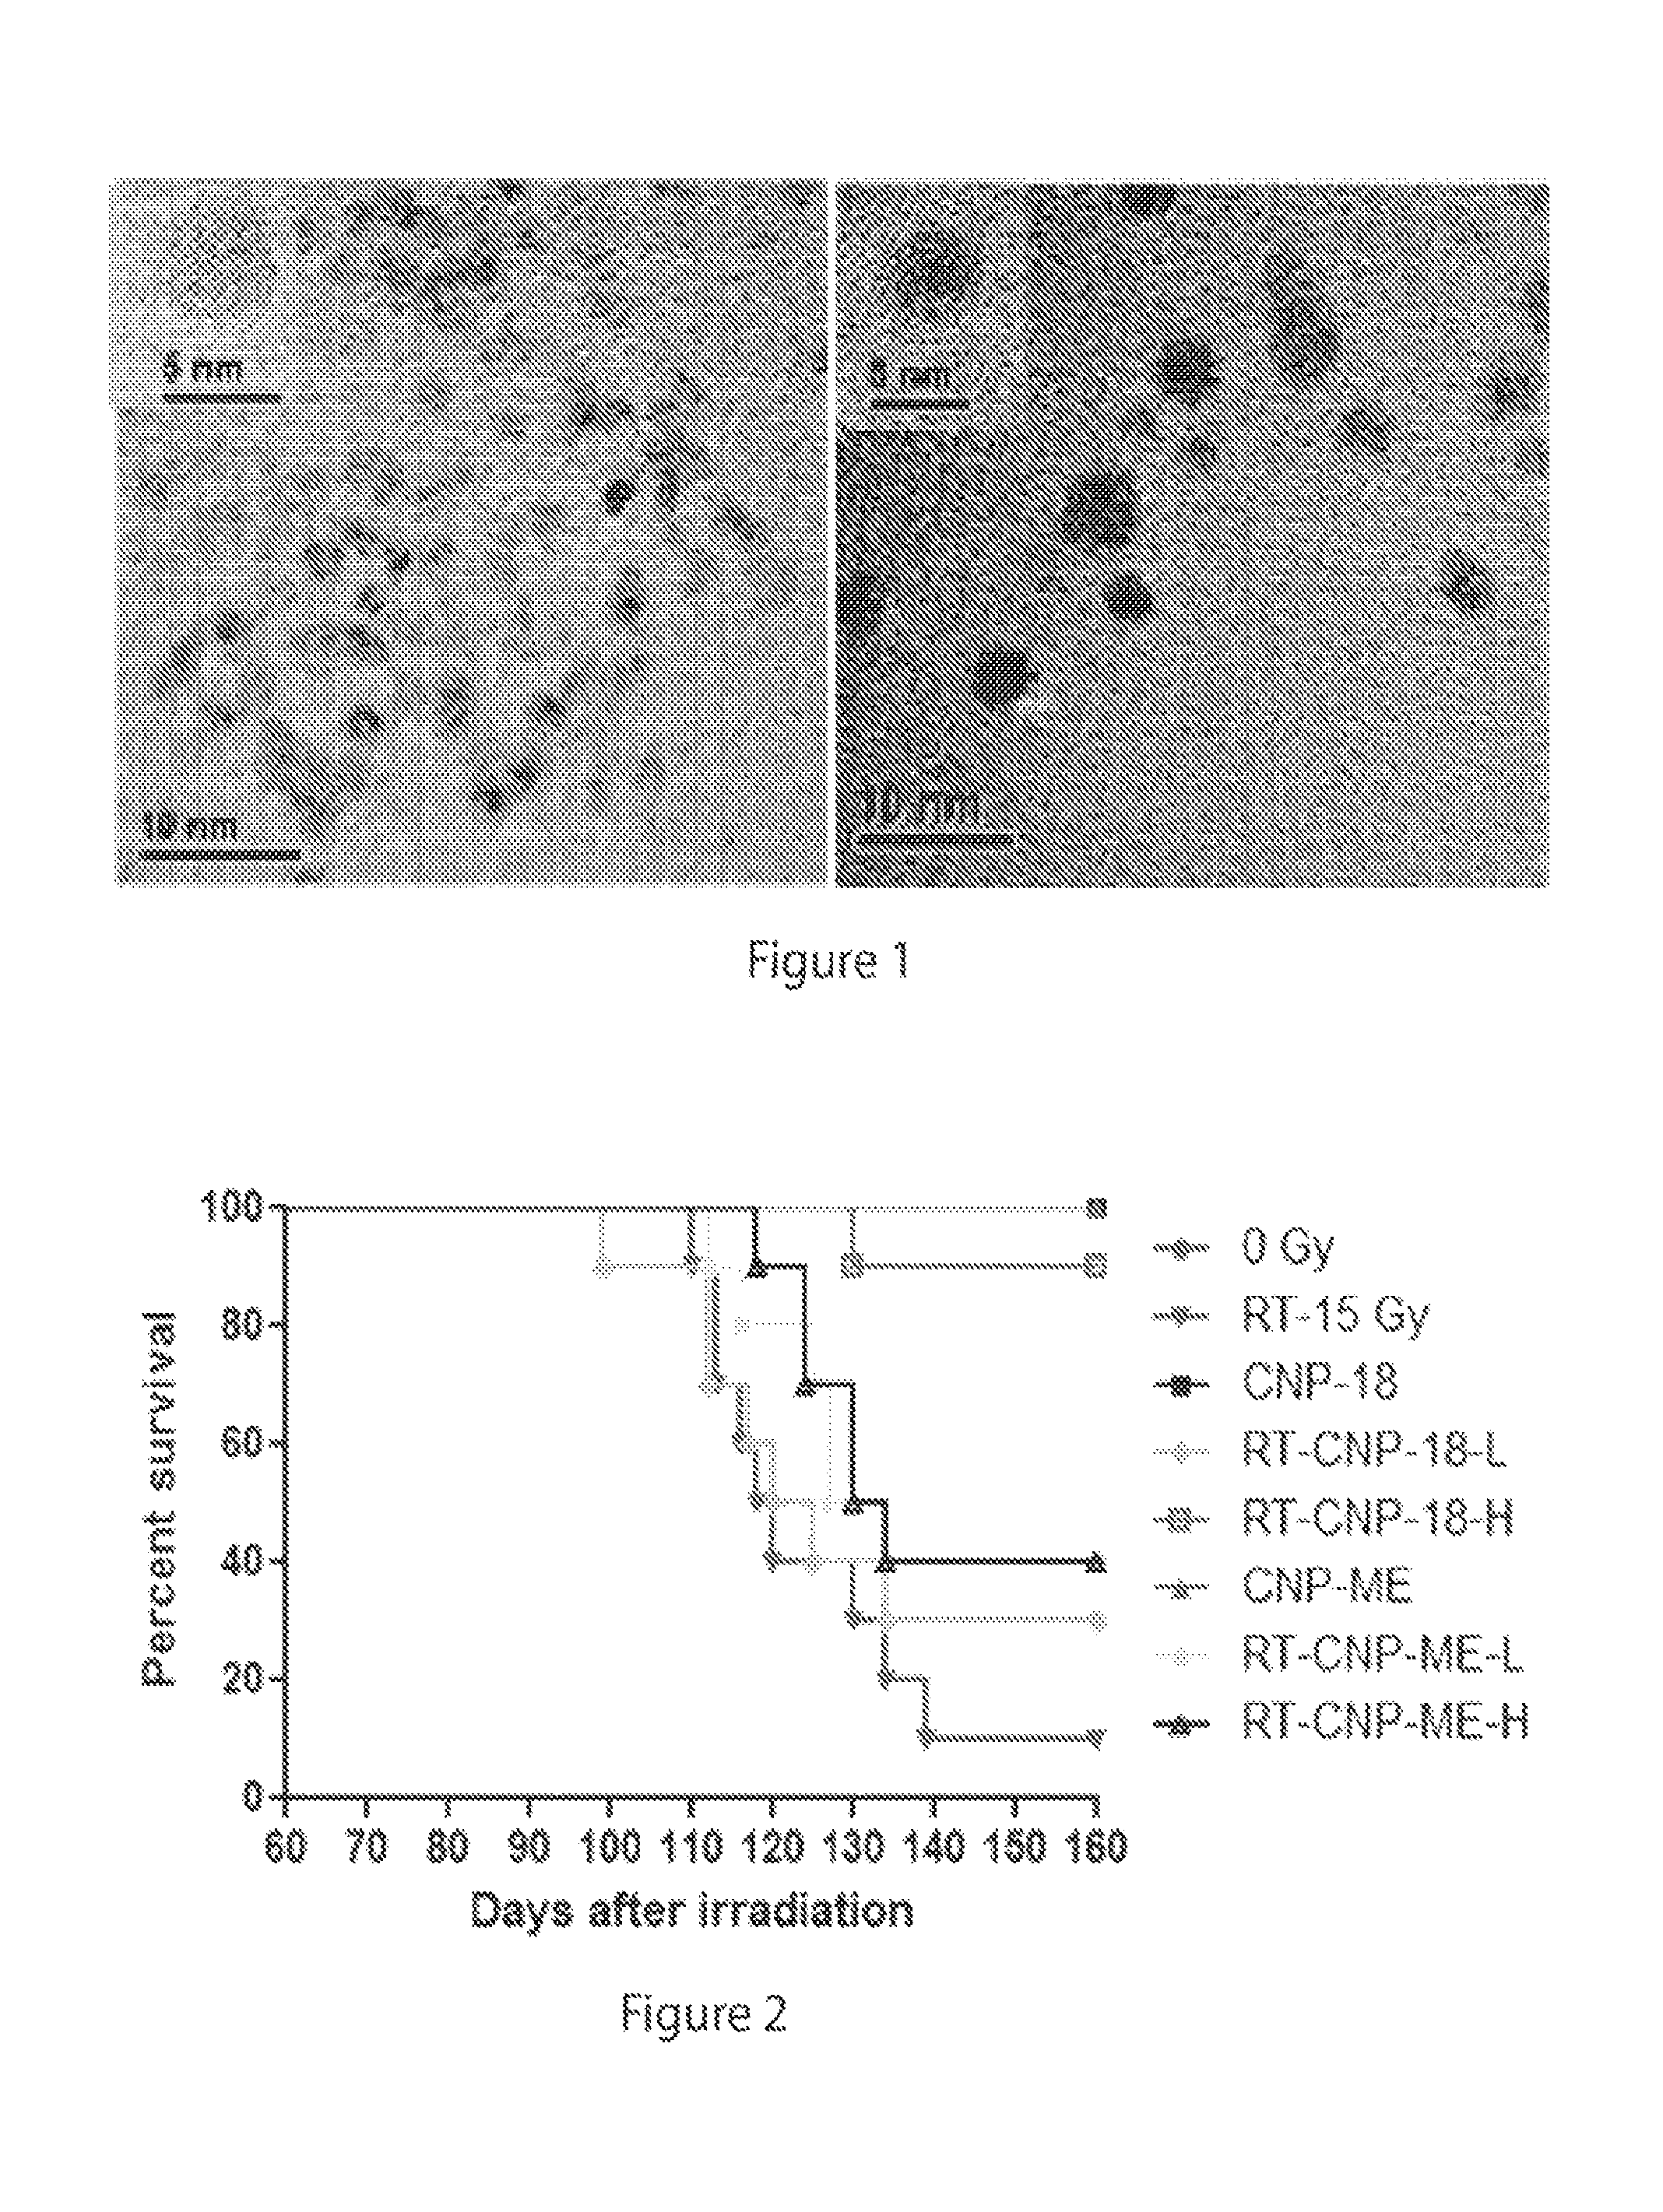 Methods of using cerium oxide nanoparticles to mitigate or protect against radiation injury